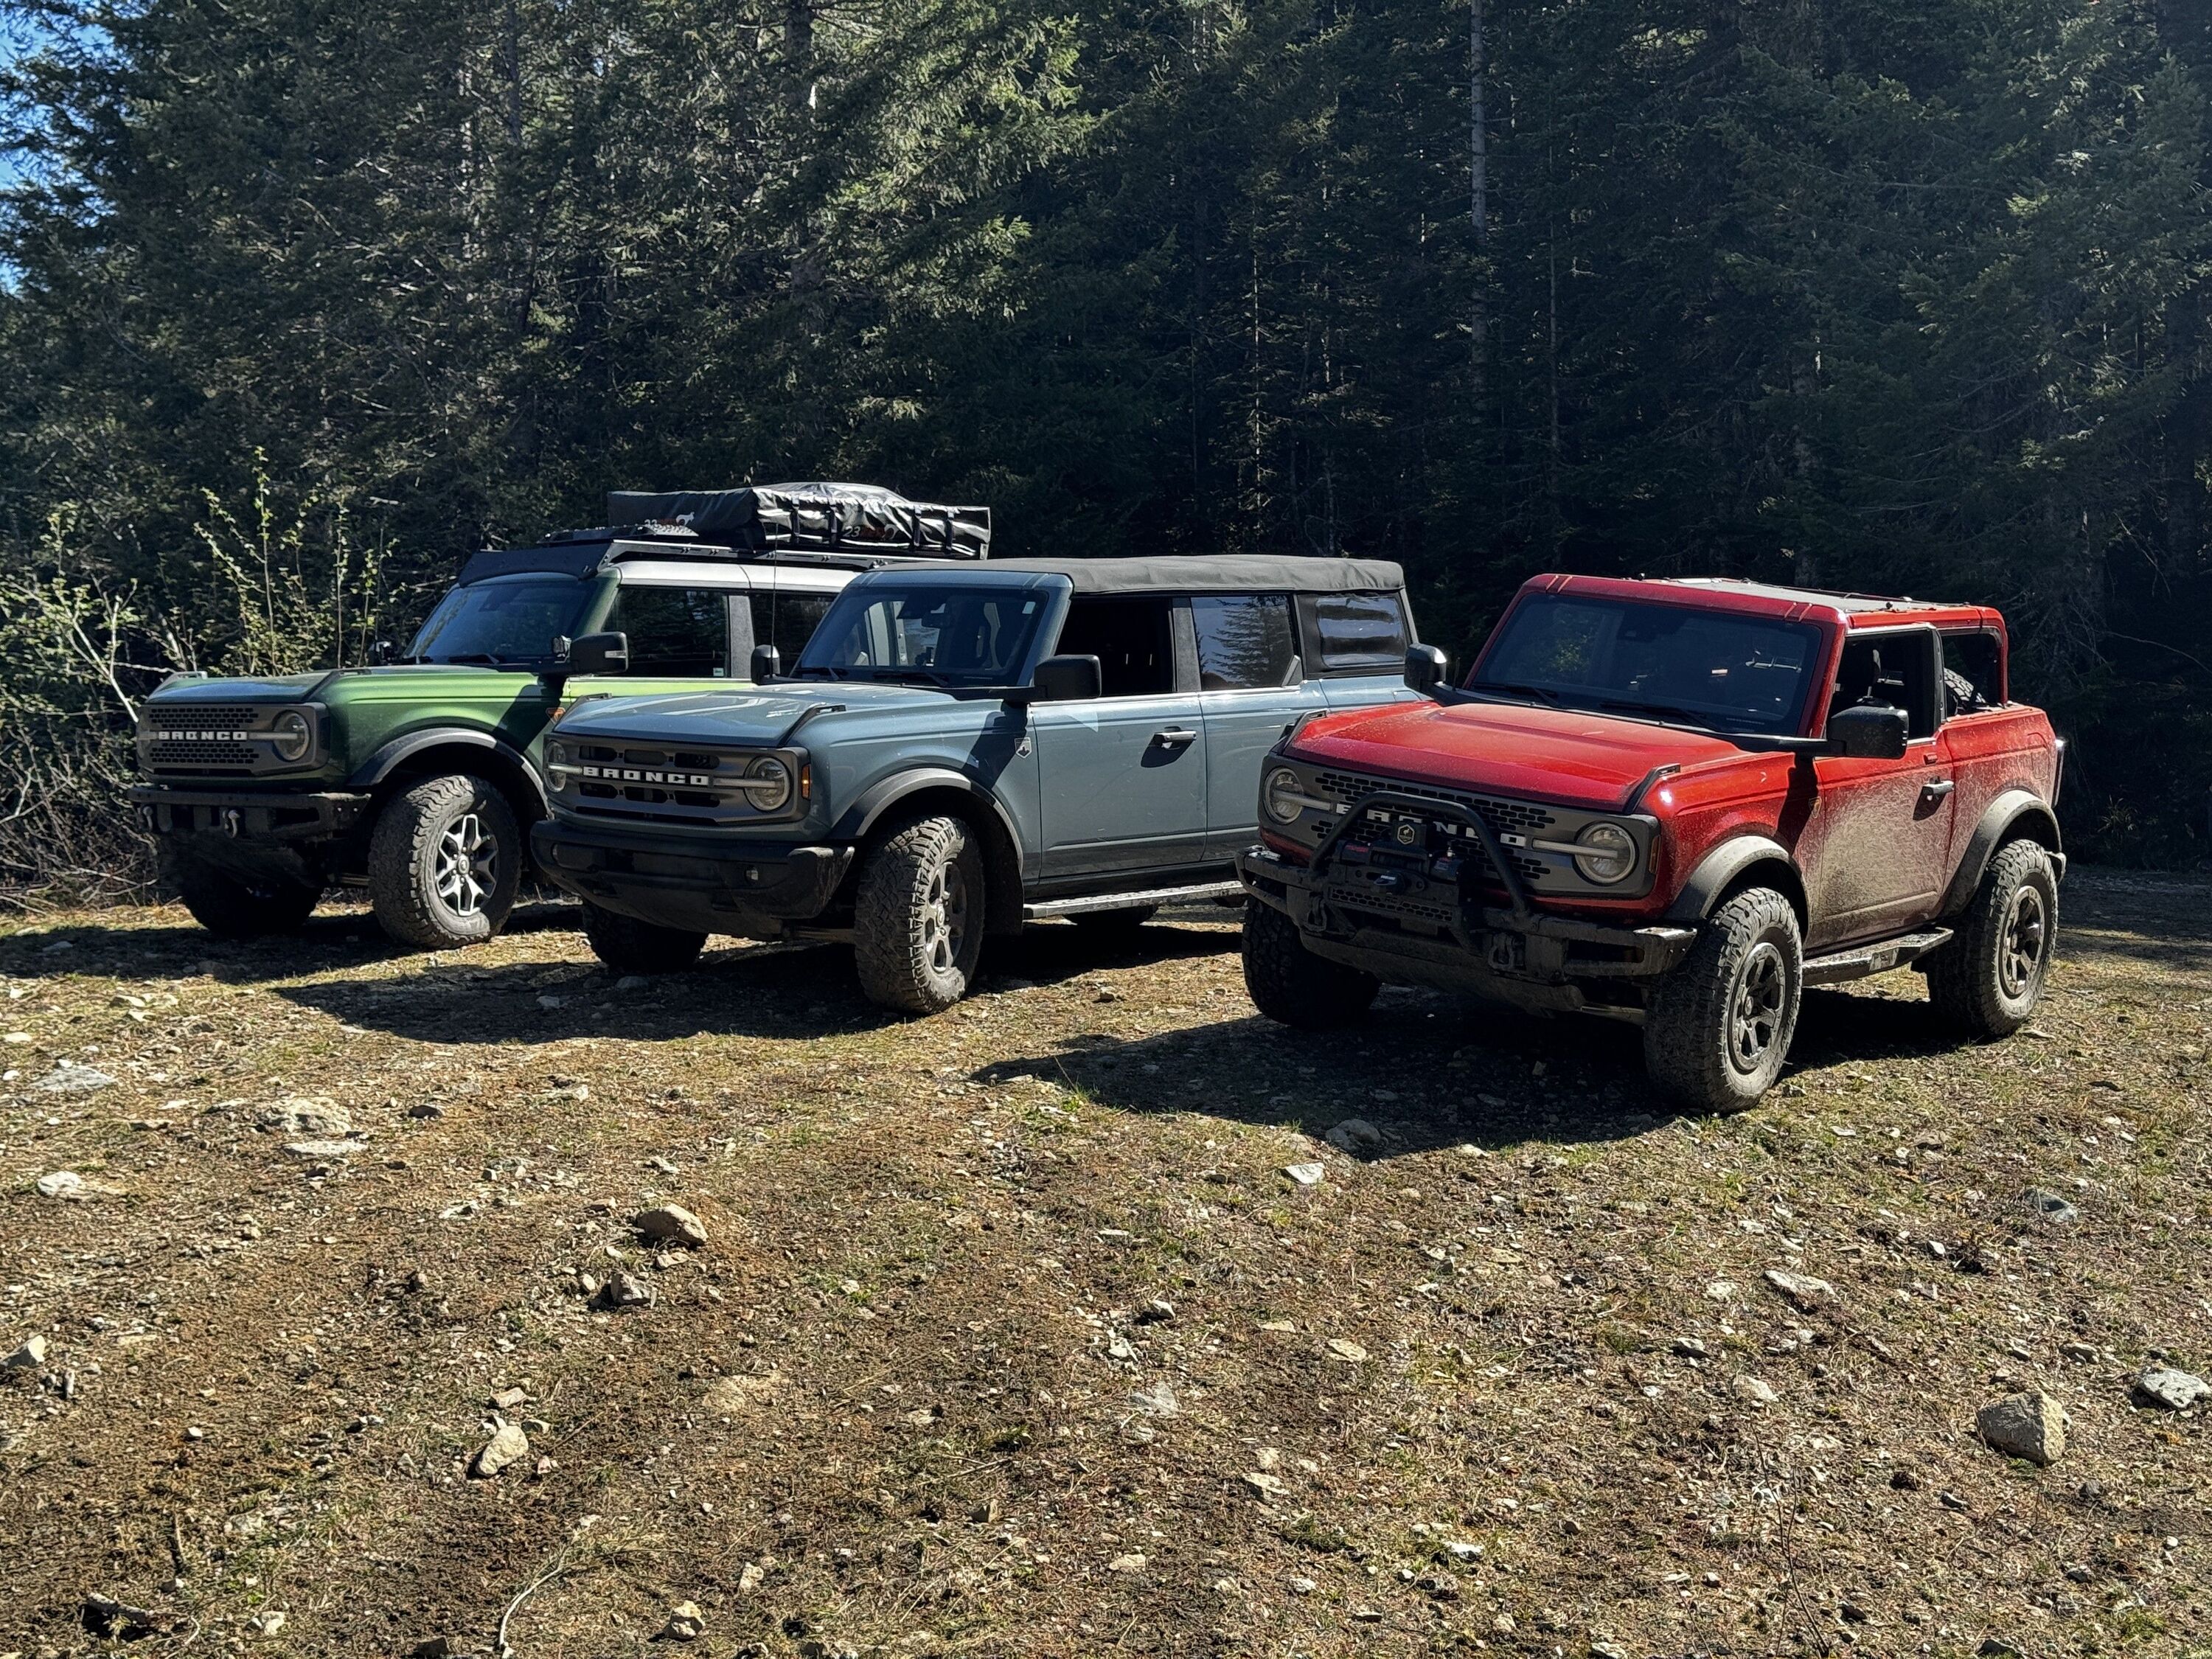 Ford Bronco My Gifford National Forest Camping and 4x4 Trip: (photo HEAVY) data